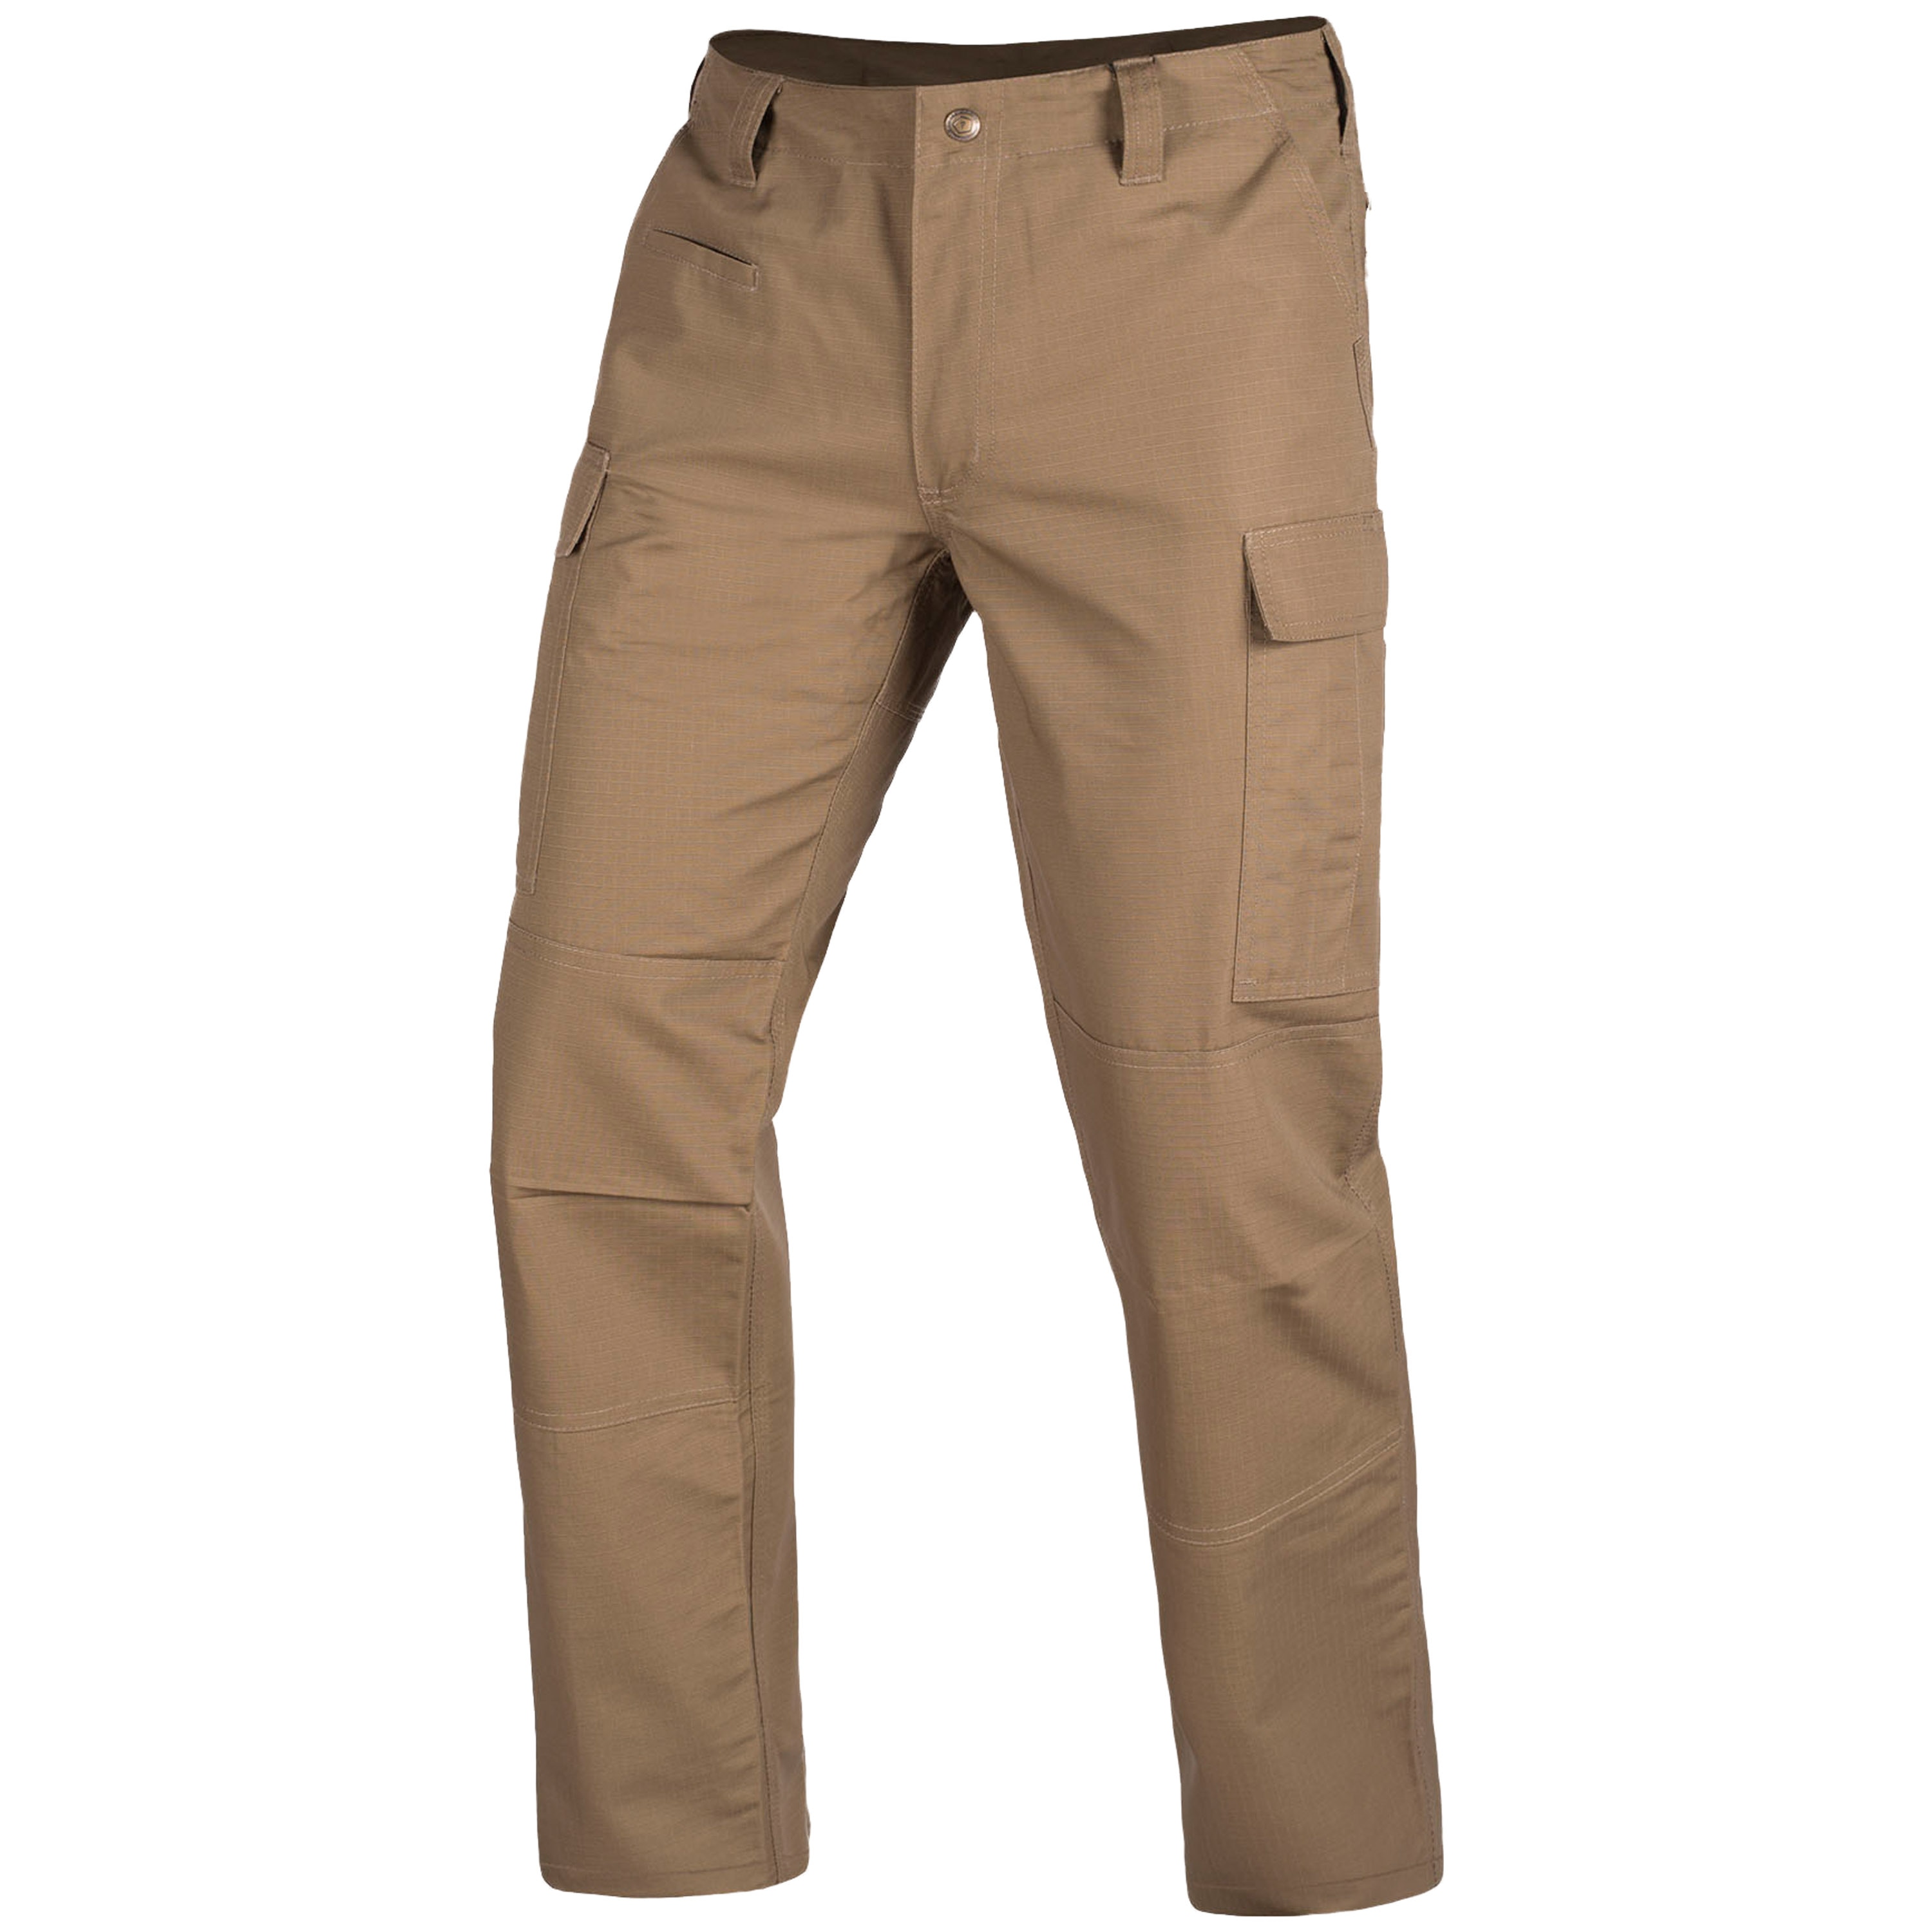 Purchase the Pentagon Pants BDU 2.0 coyote by ASMC